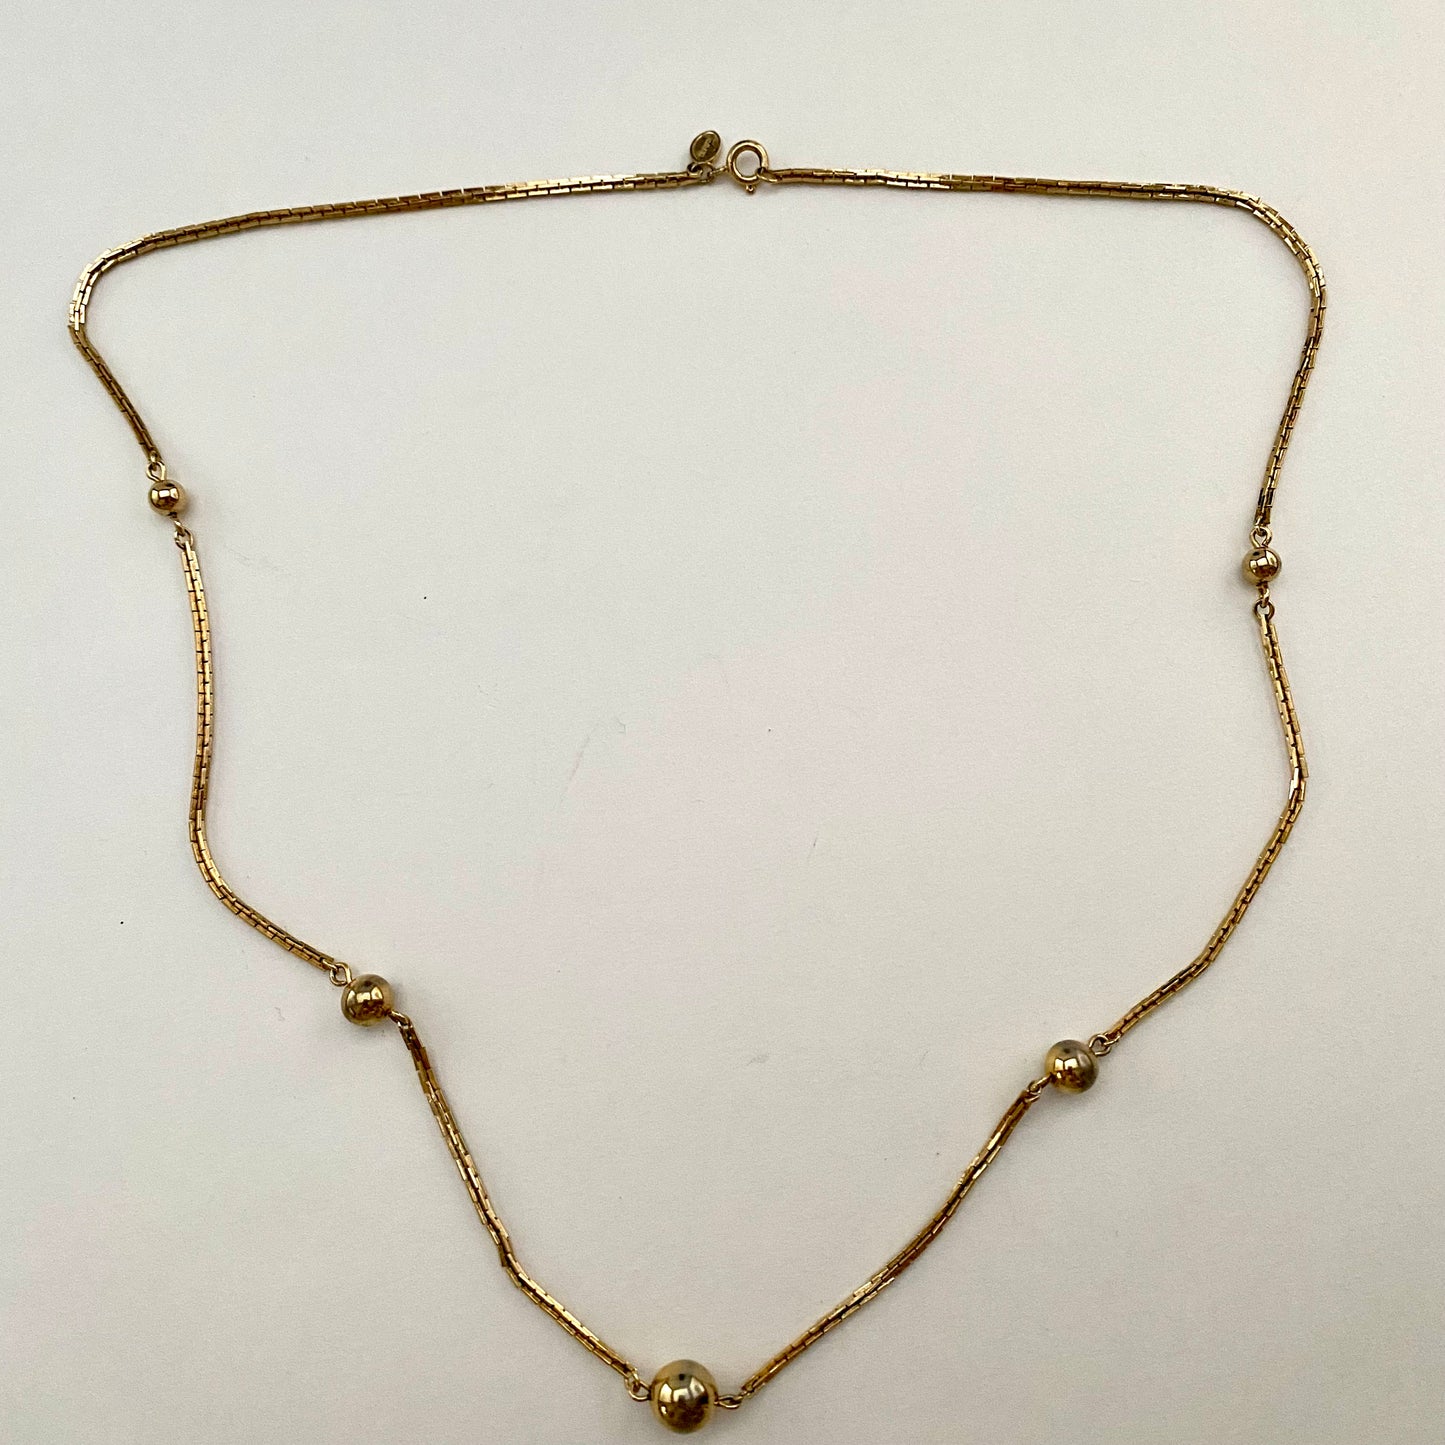 1978 Avon Beaded Chain Necklace